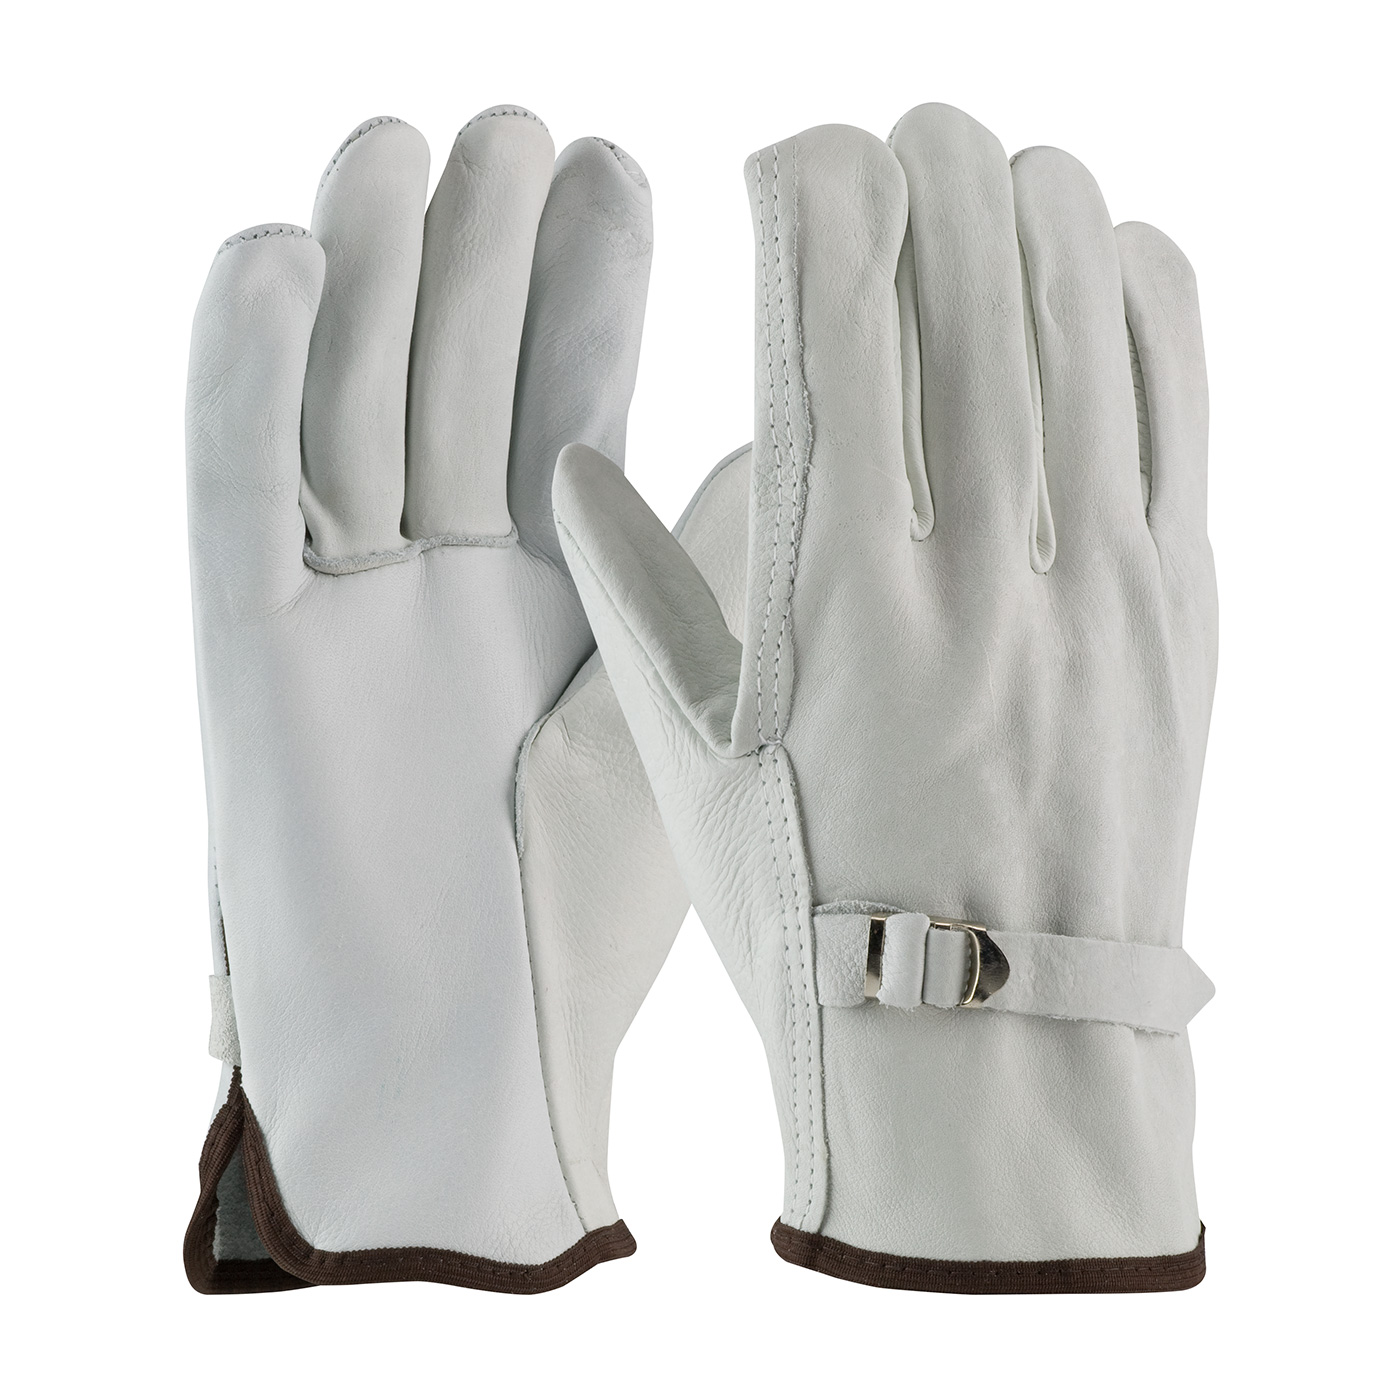 PIP® Superior Grade Top Grain Cowhide Leather Drivers Glove with Pull Strap Closure - Straight Thumb #68-158